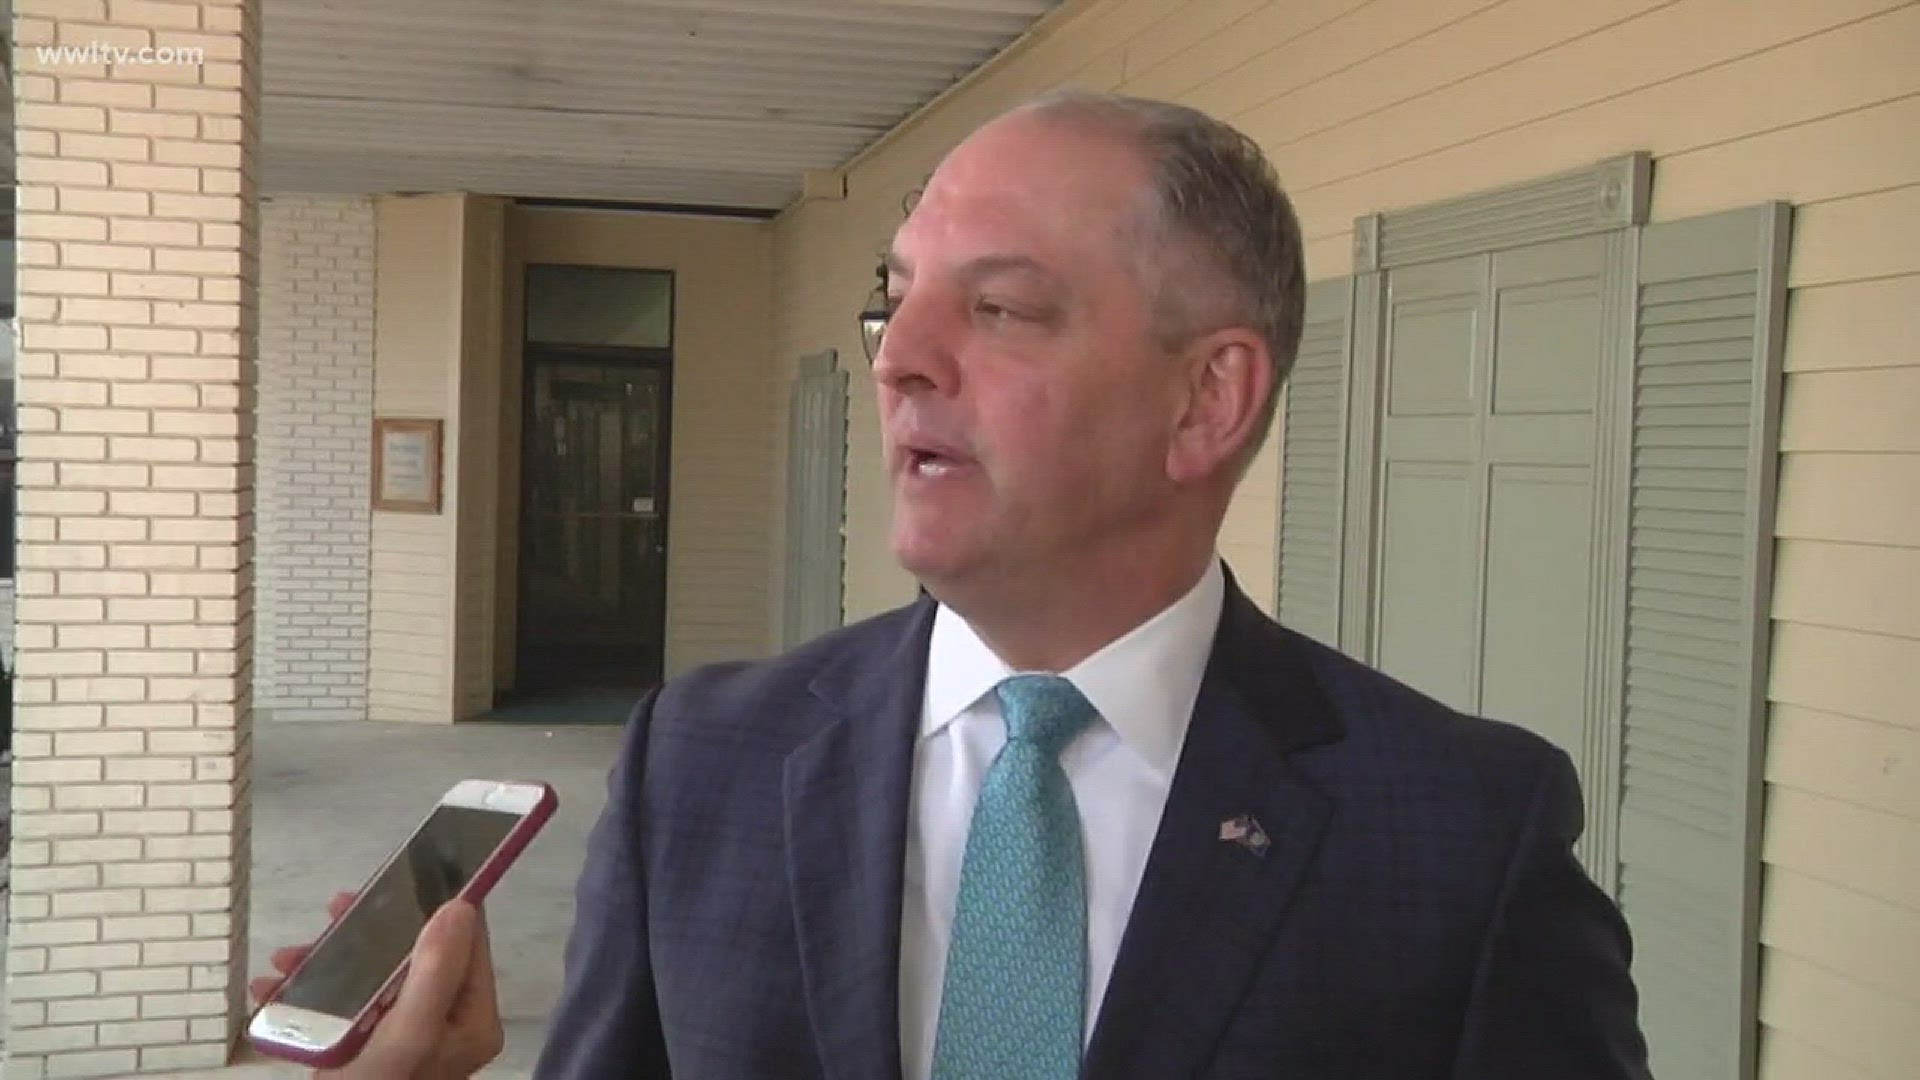 Governor John Bel Edwards says Secretary of State Tom Schedler should resign over sexual harassment claims.